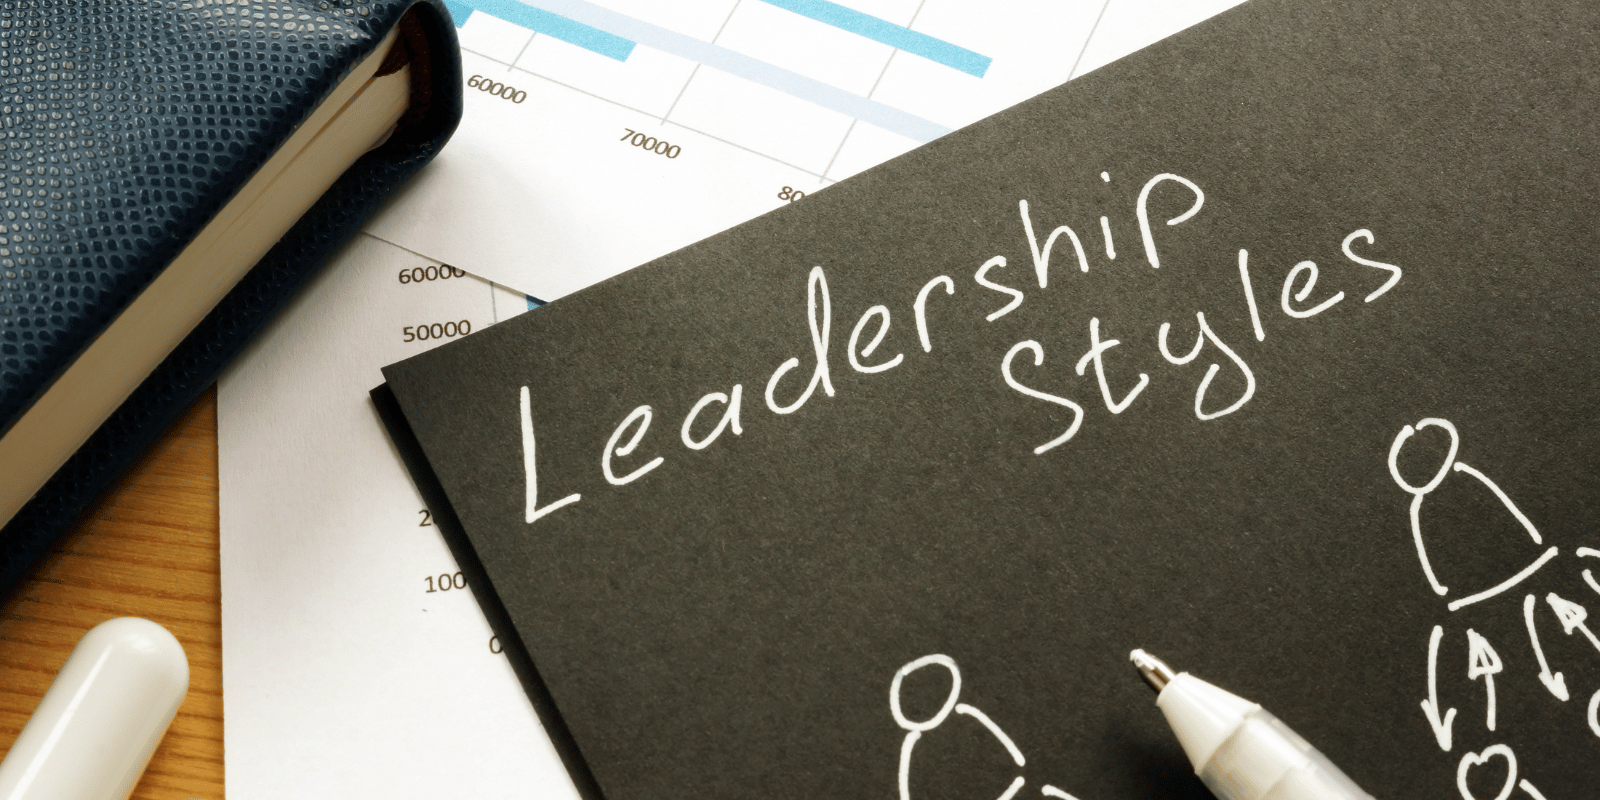 Why your leadership style matters?